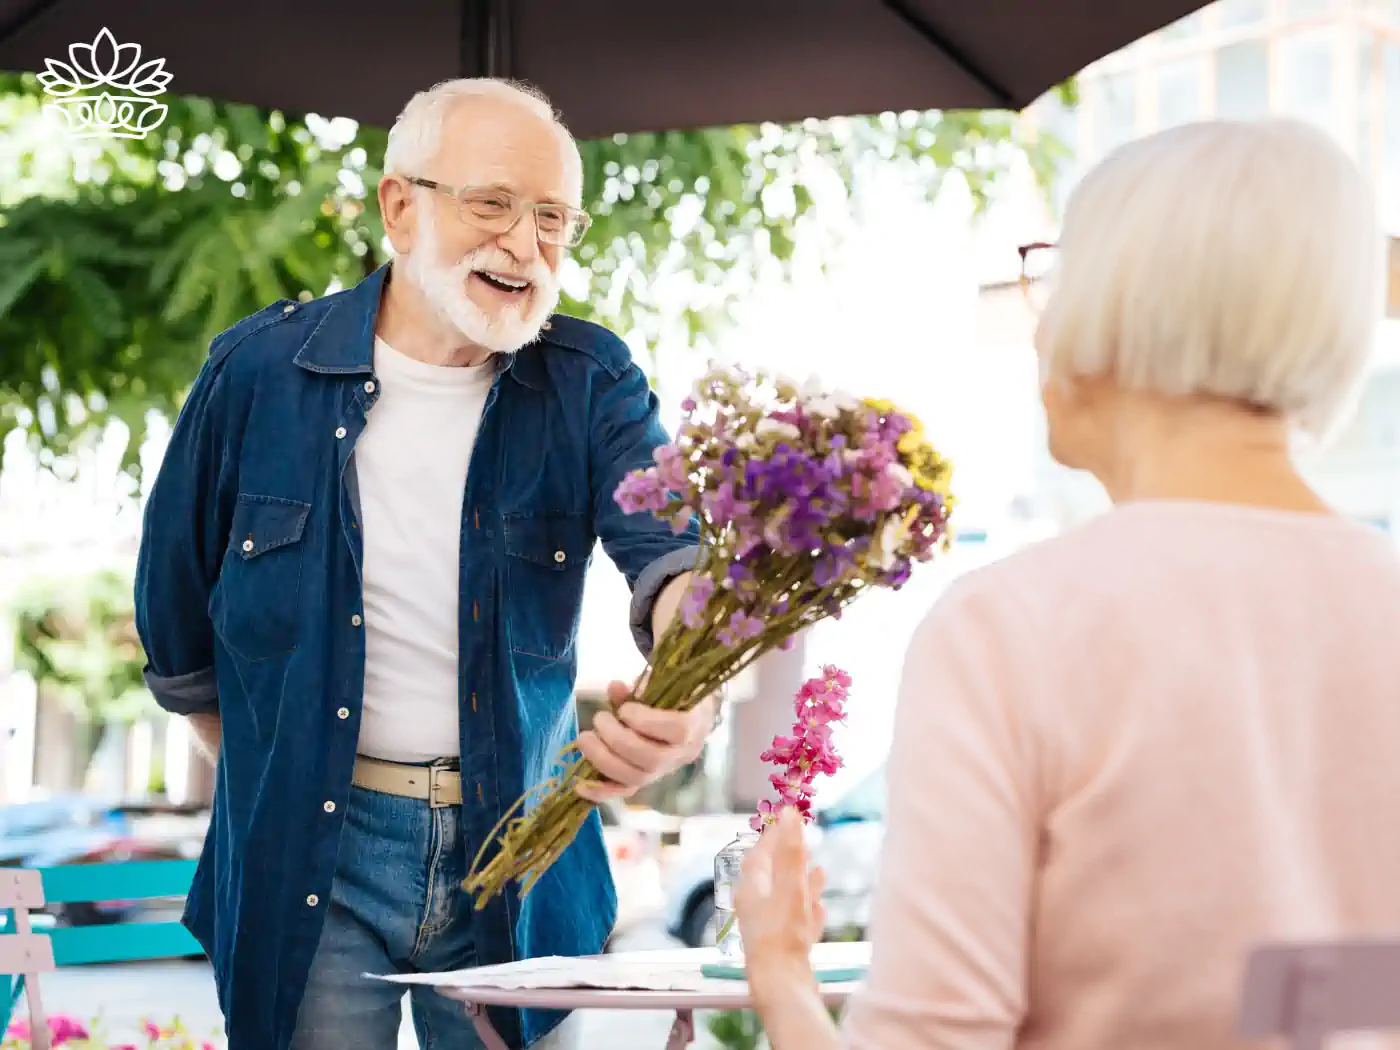 A touching scene of an elderly man presenting a bouquet of flowers to his wife, symbolizing enduring love and cherished memories. Fabulous Flowers and Gifts.